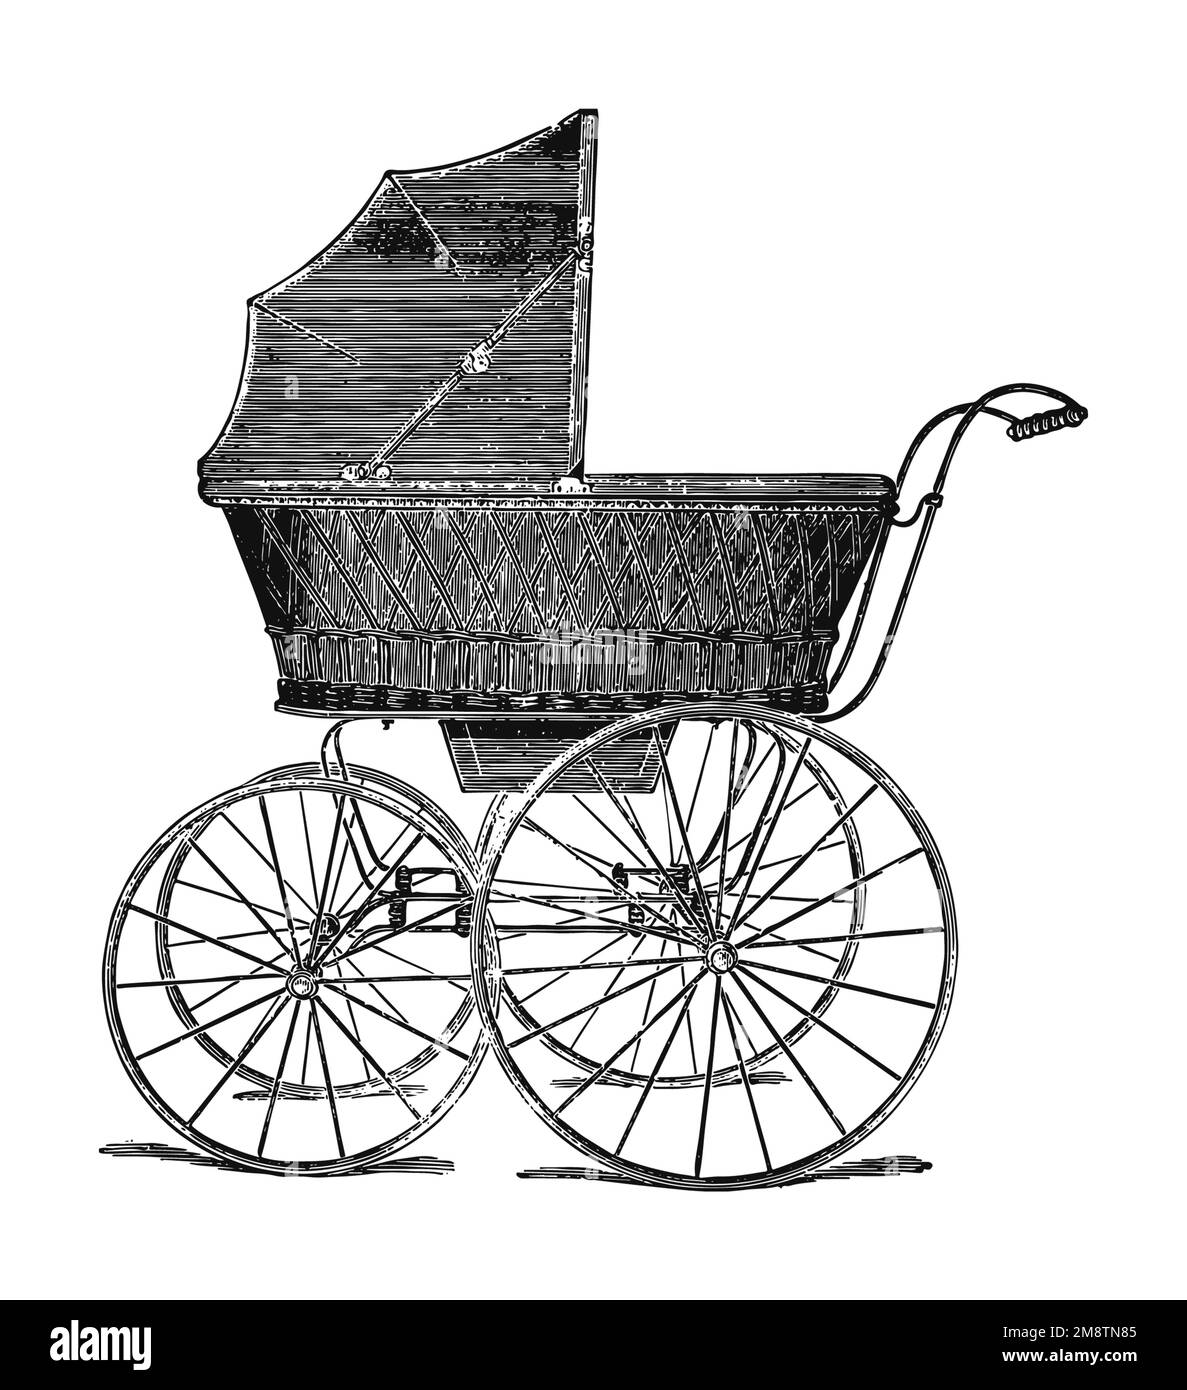 Vintage babycart or pushchair Stock Photo